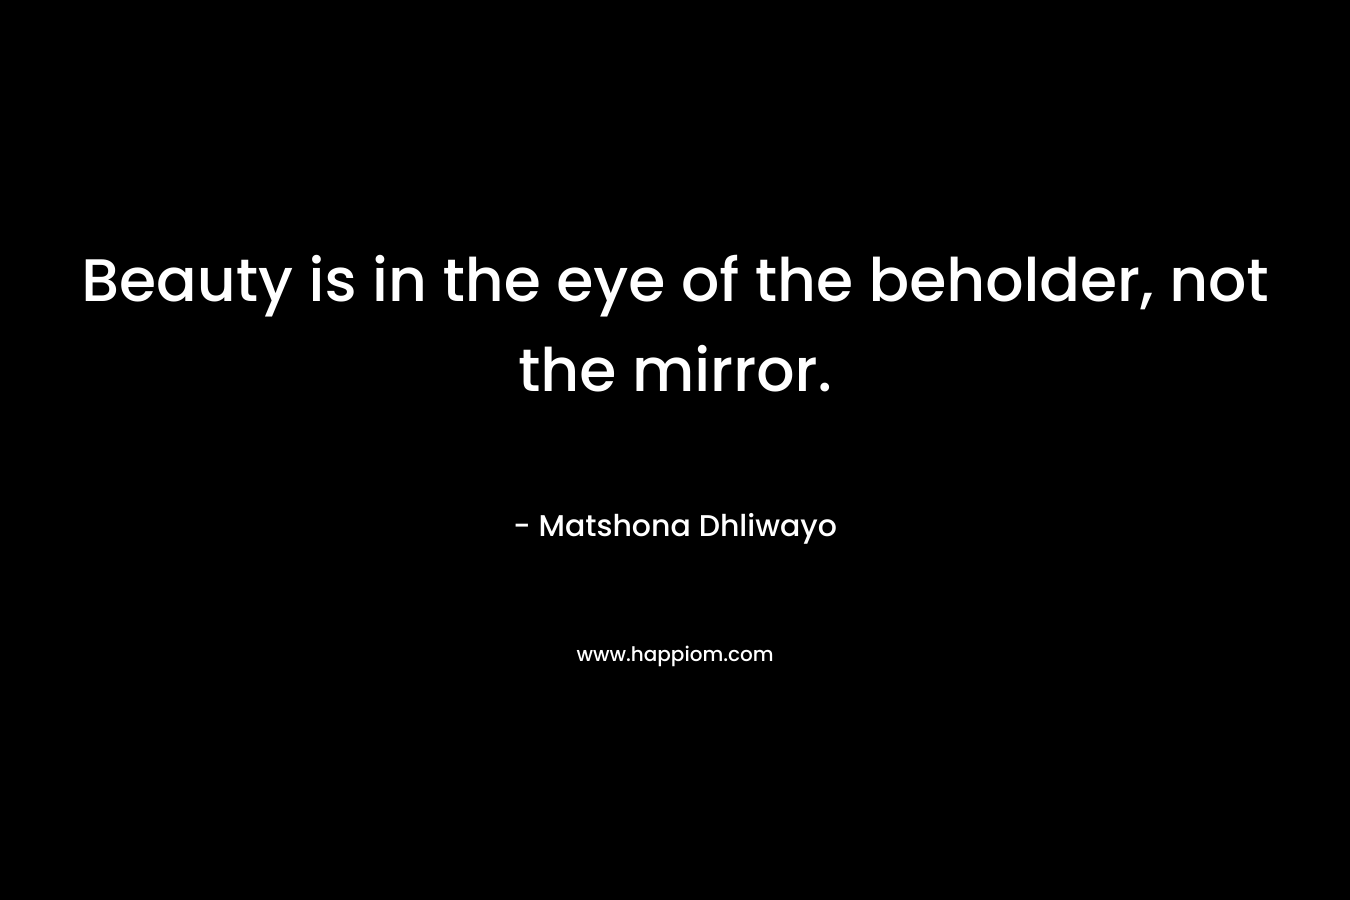 Beauty is in the eye of the beholder, not the mirror.